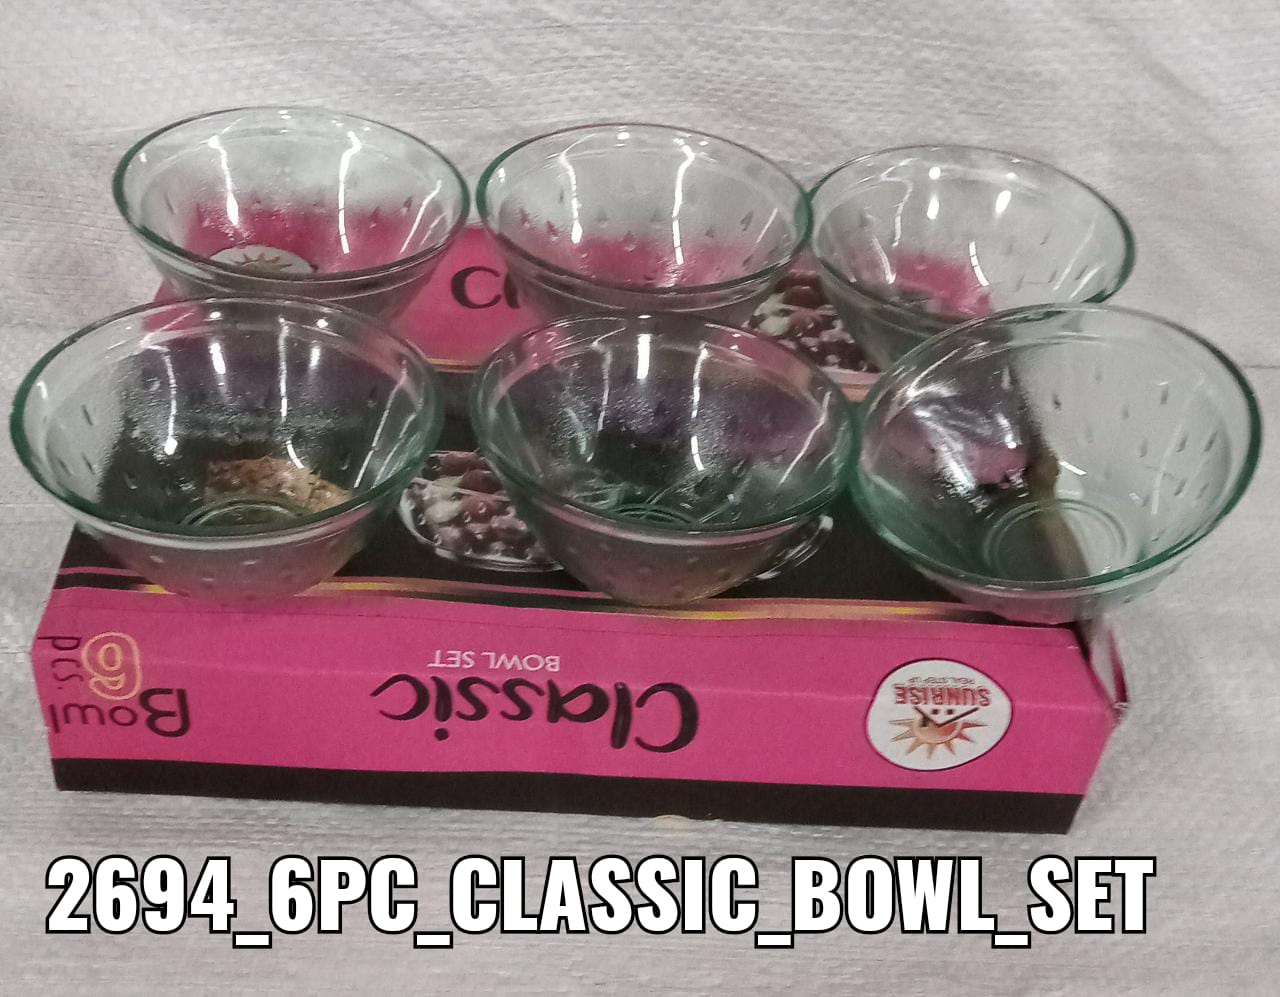 2694 6 Pc Classic Bowl Set used in all kinds of household and kitchen purposes for serving food stuffs and items etc. in it. 